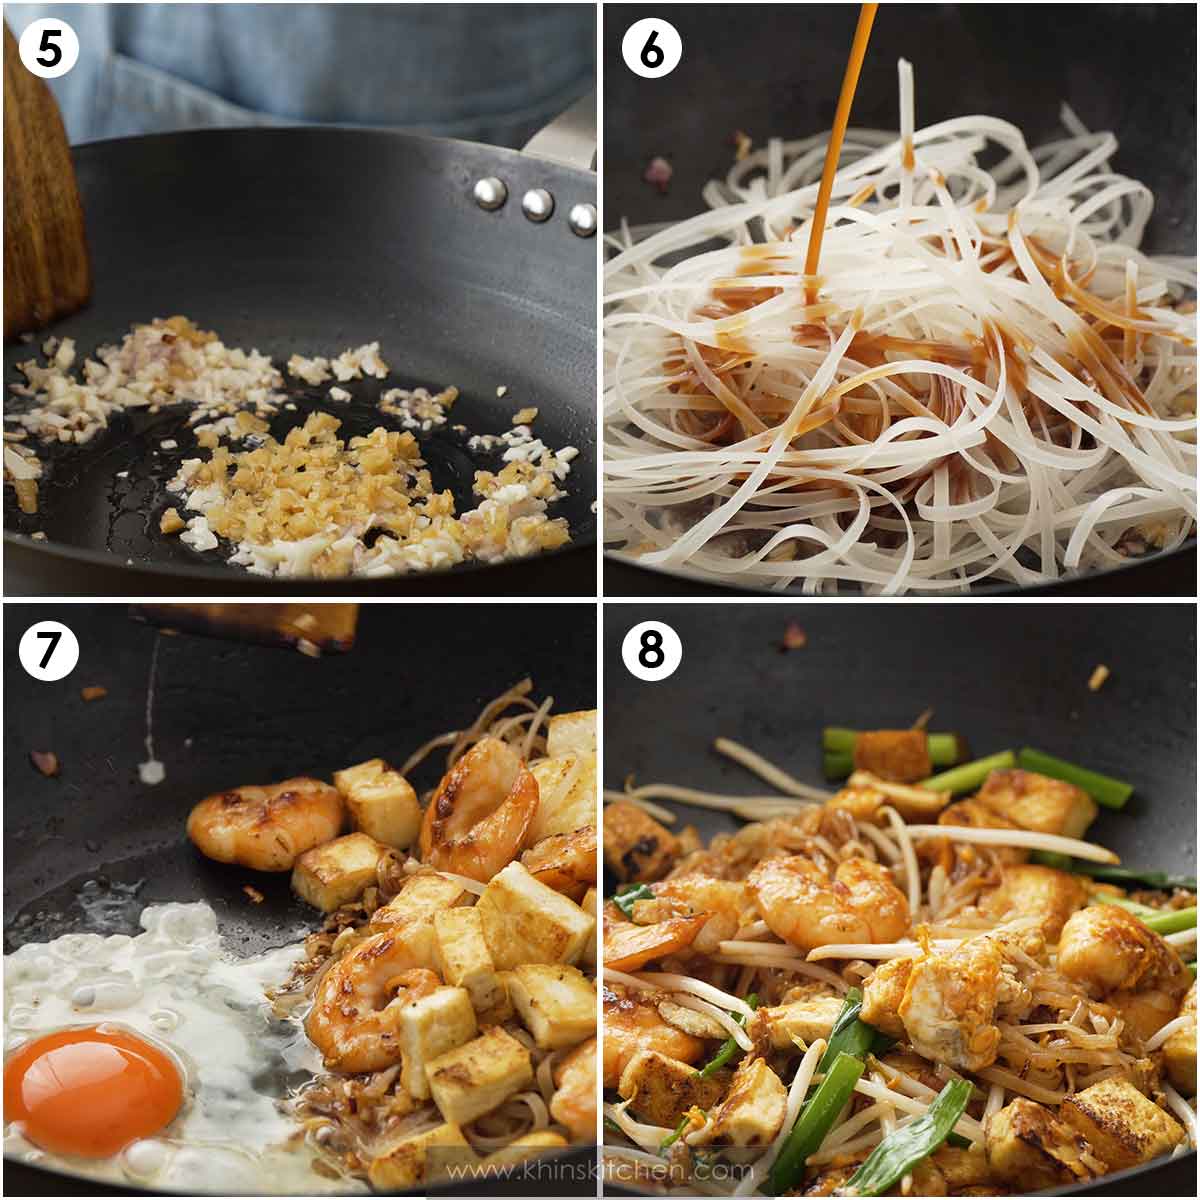 4 image collage showing how to stir fry noodles with prawns, tofu, eggs, and vegetables. 